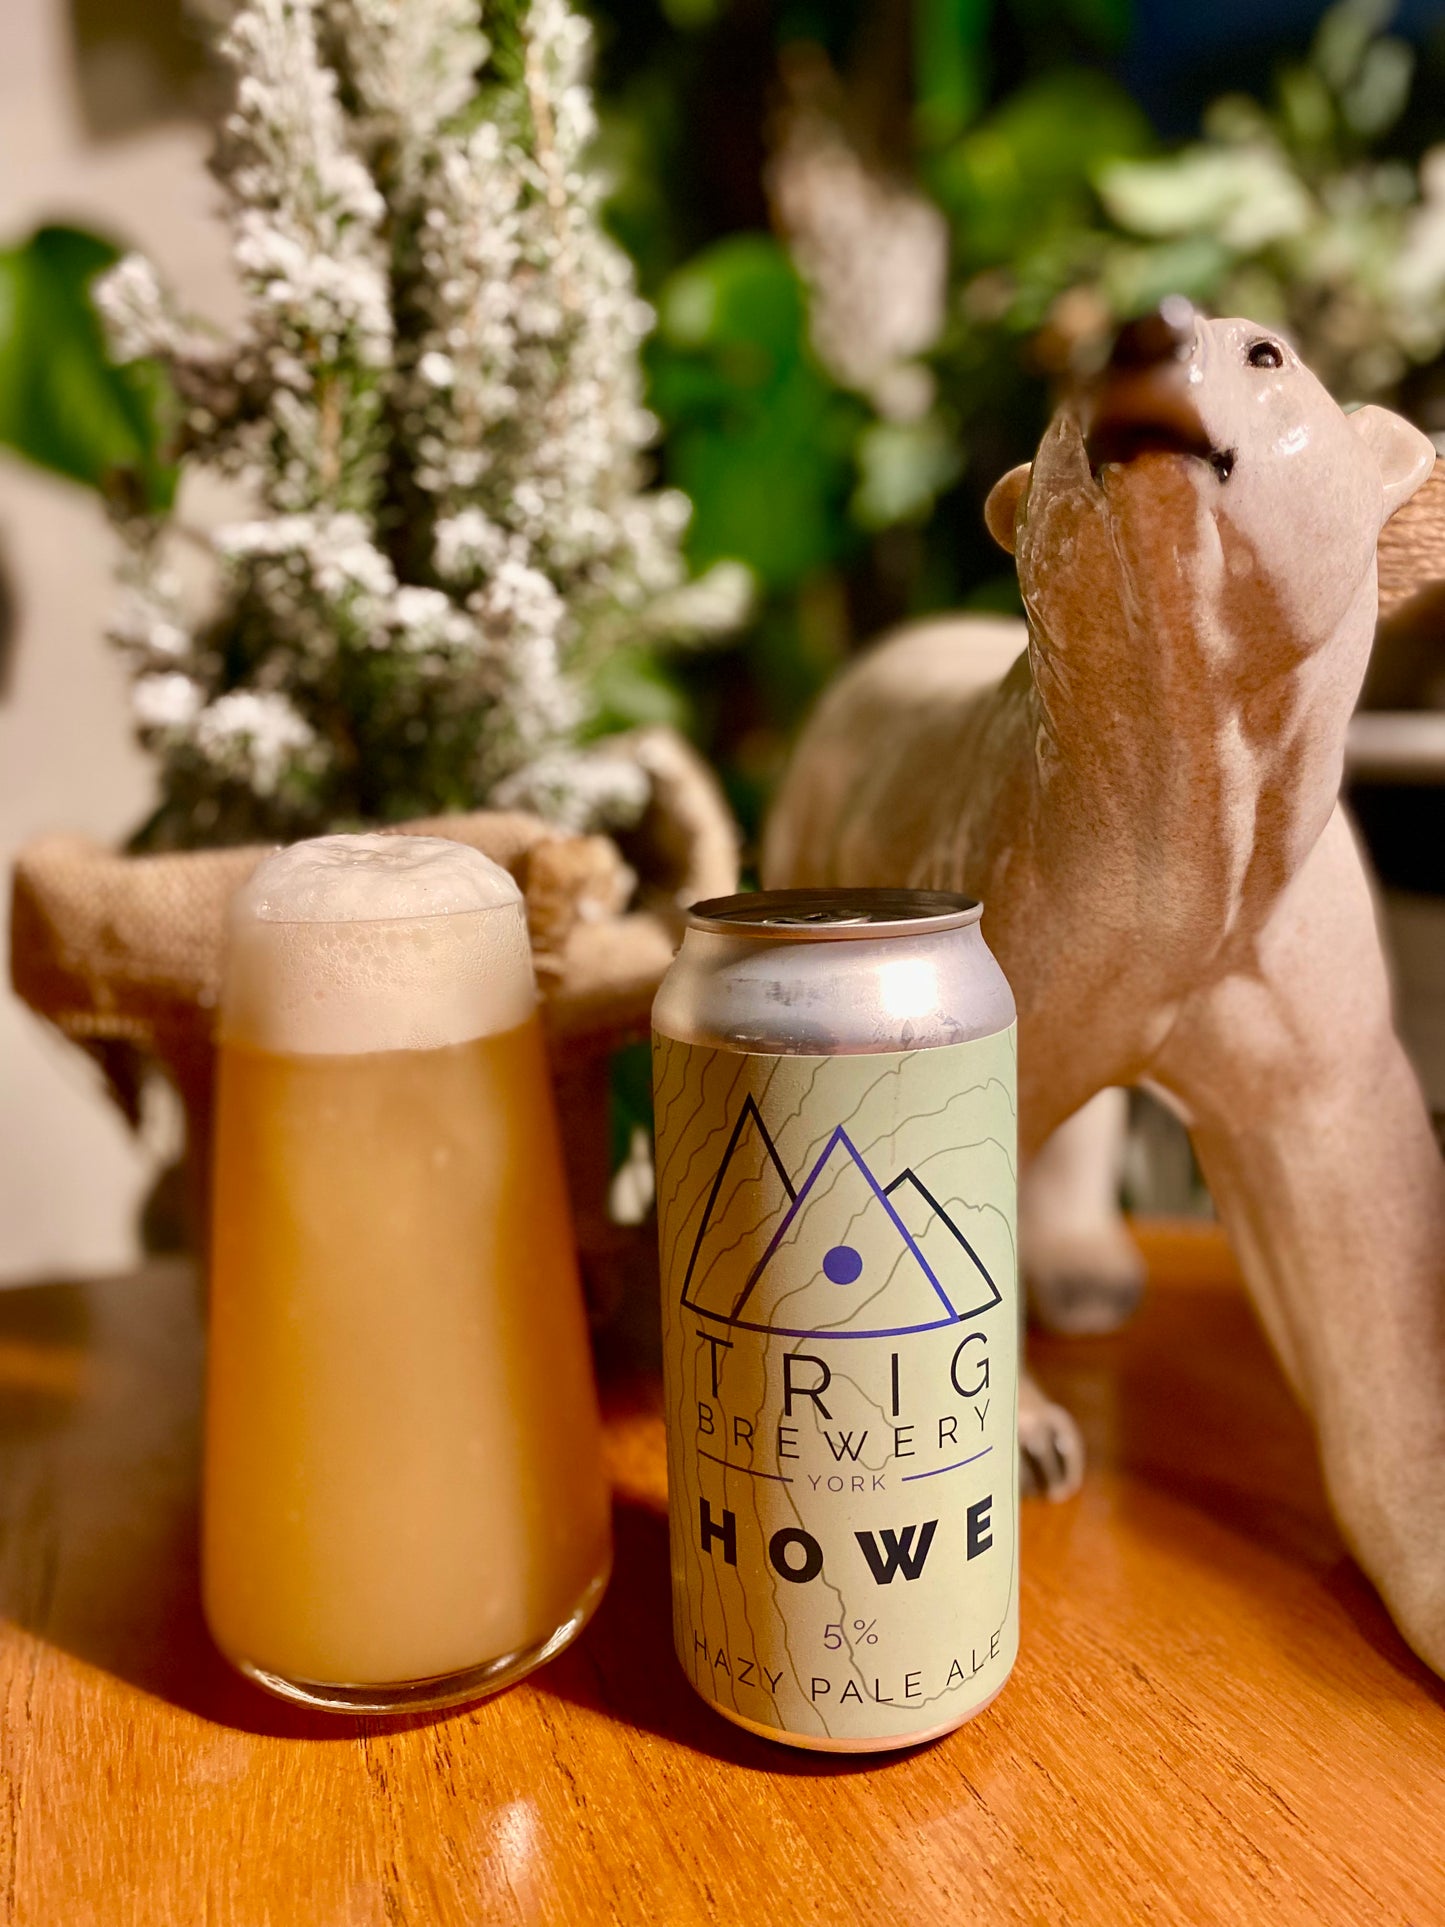 Howe - 5% Hazy Pale Ale - 440ml Can